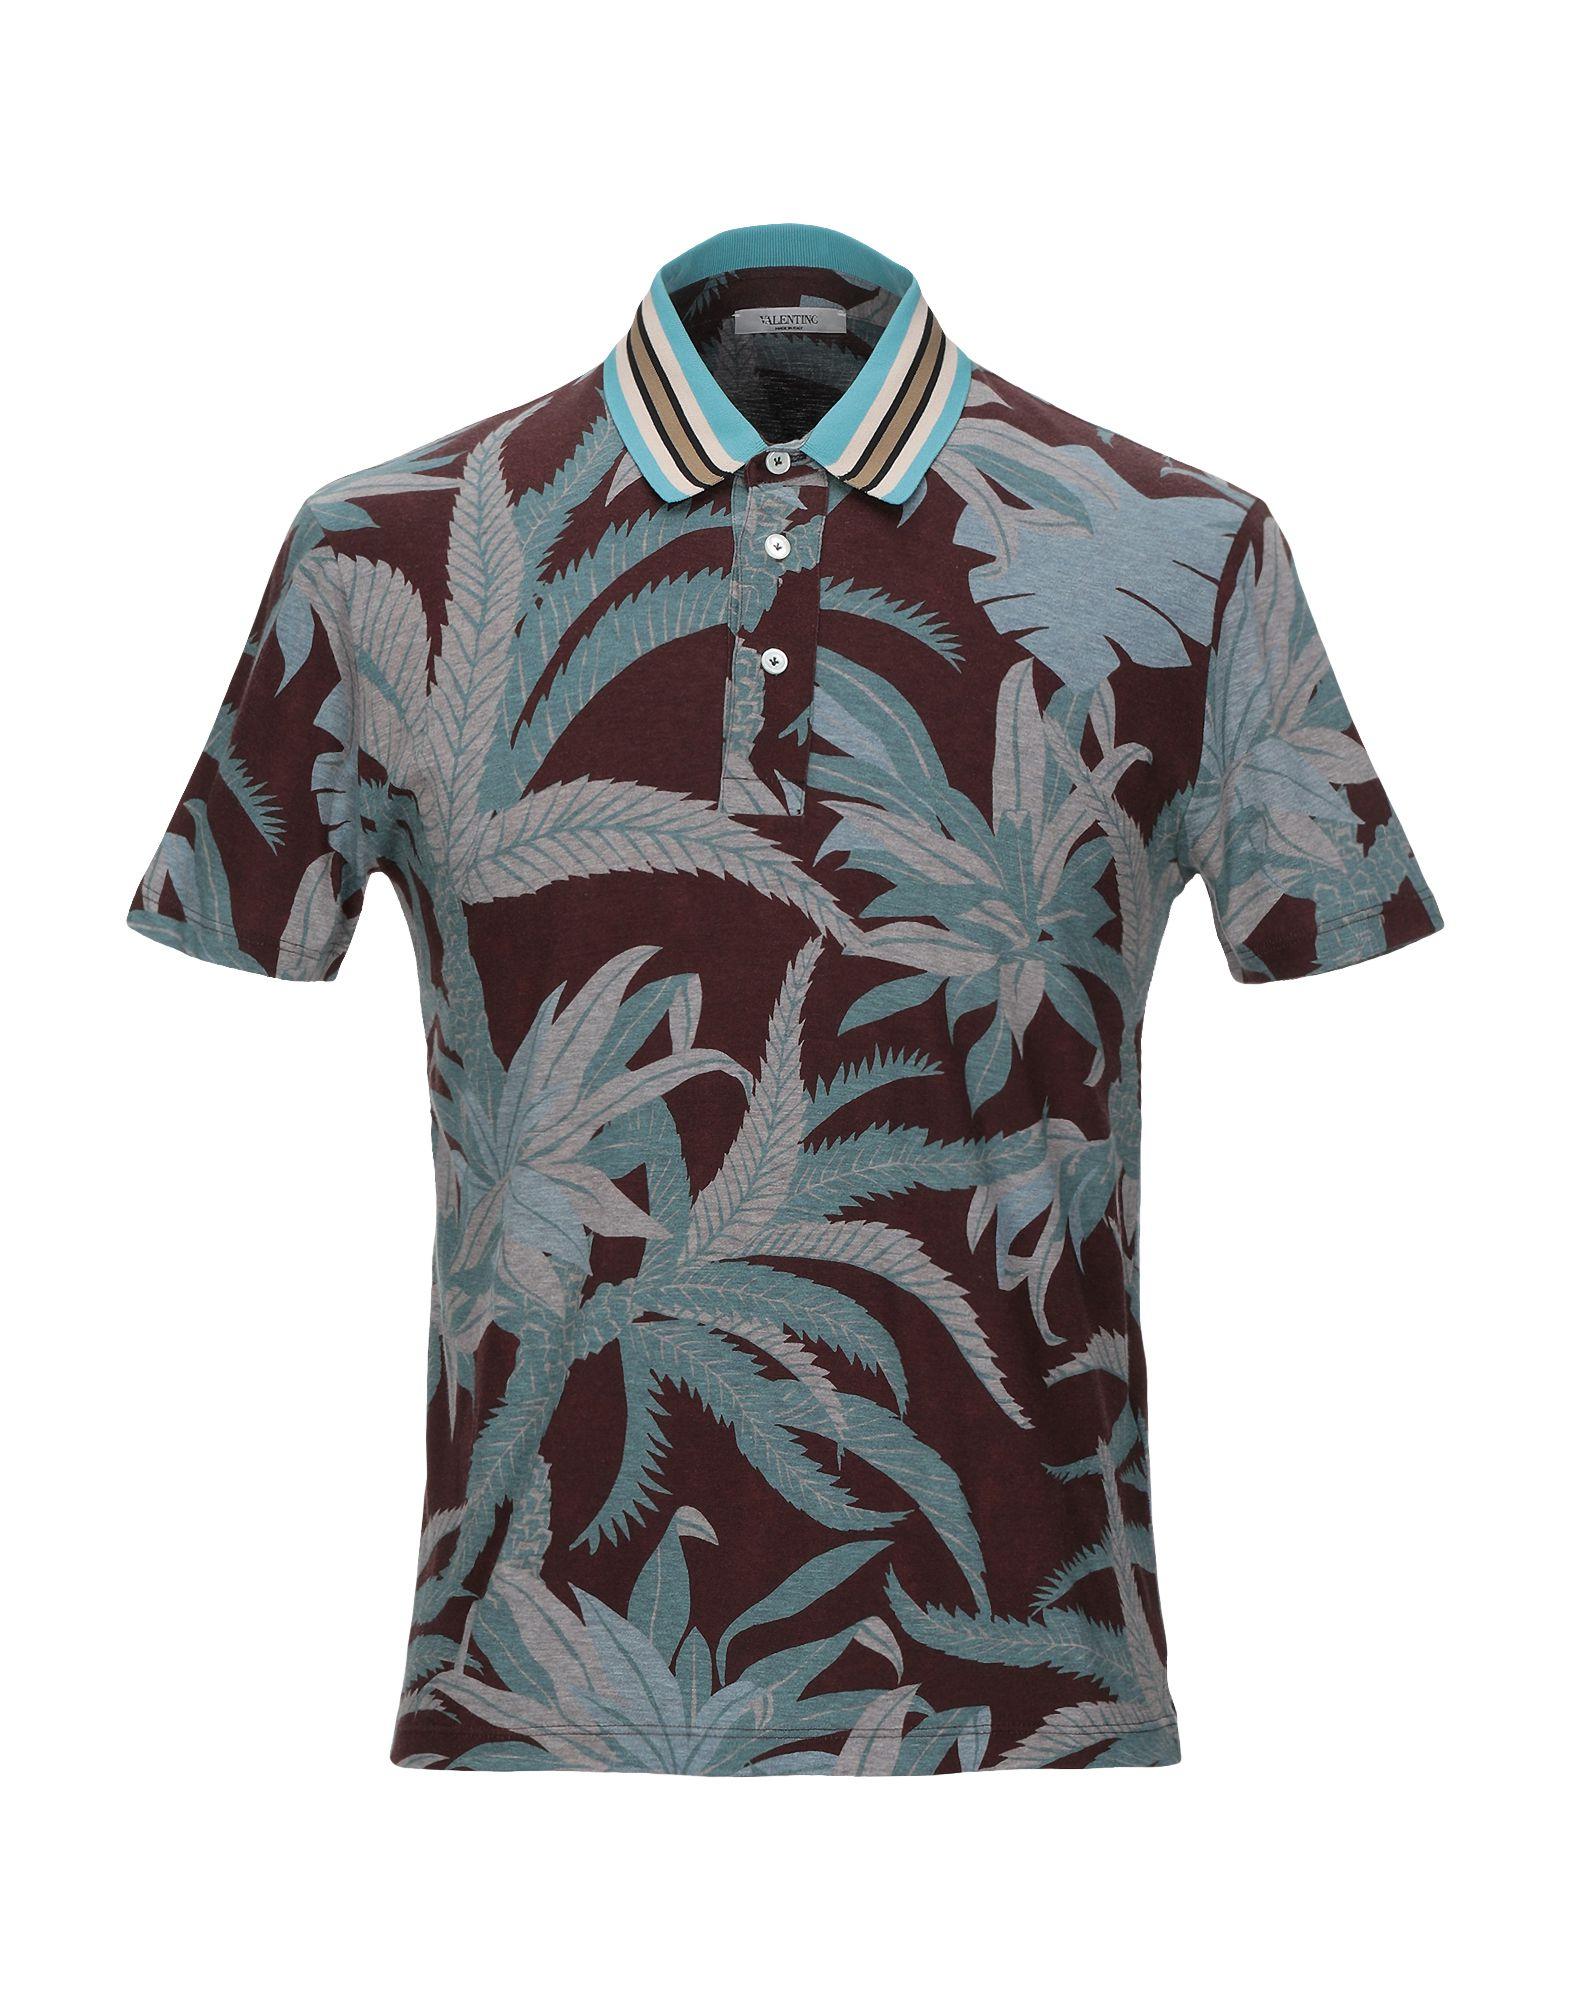 Valentino Polo Shirt in Brown for Men - Lyst